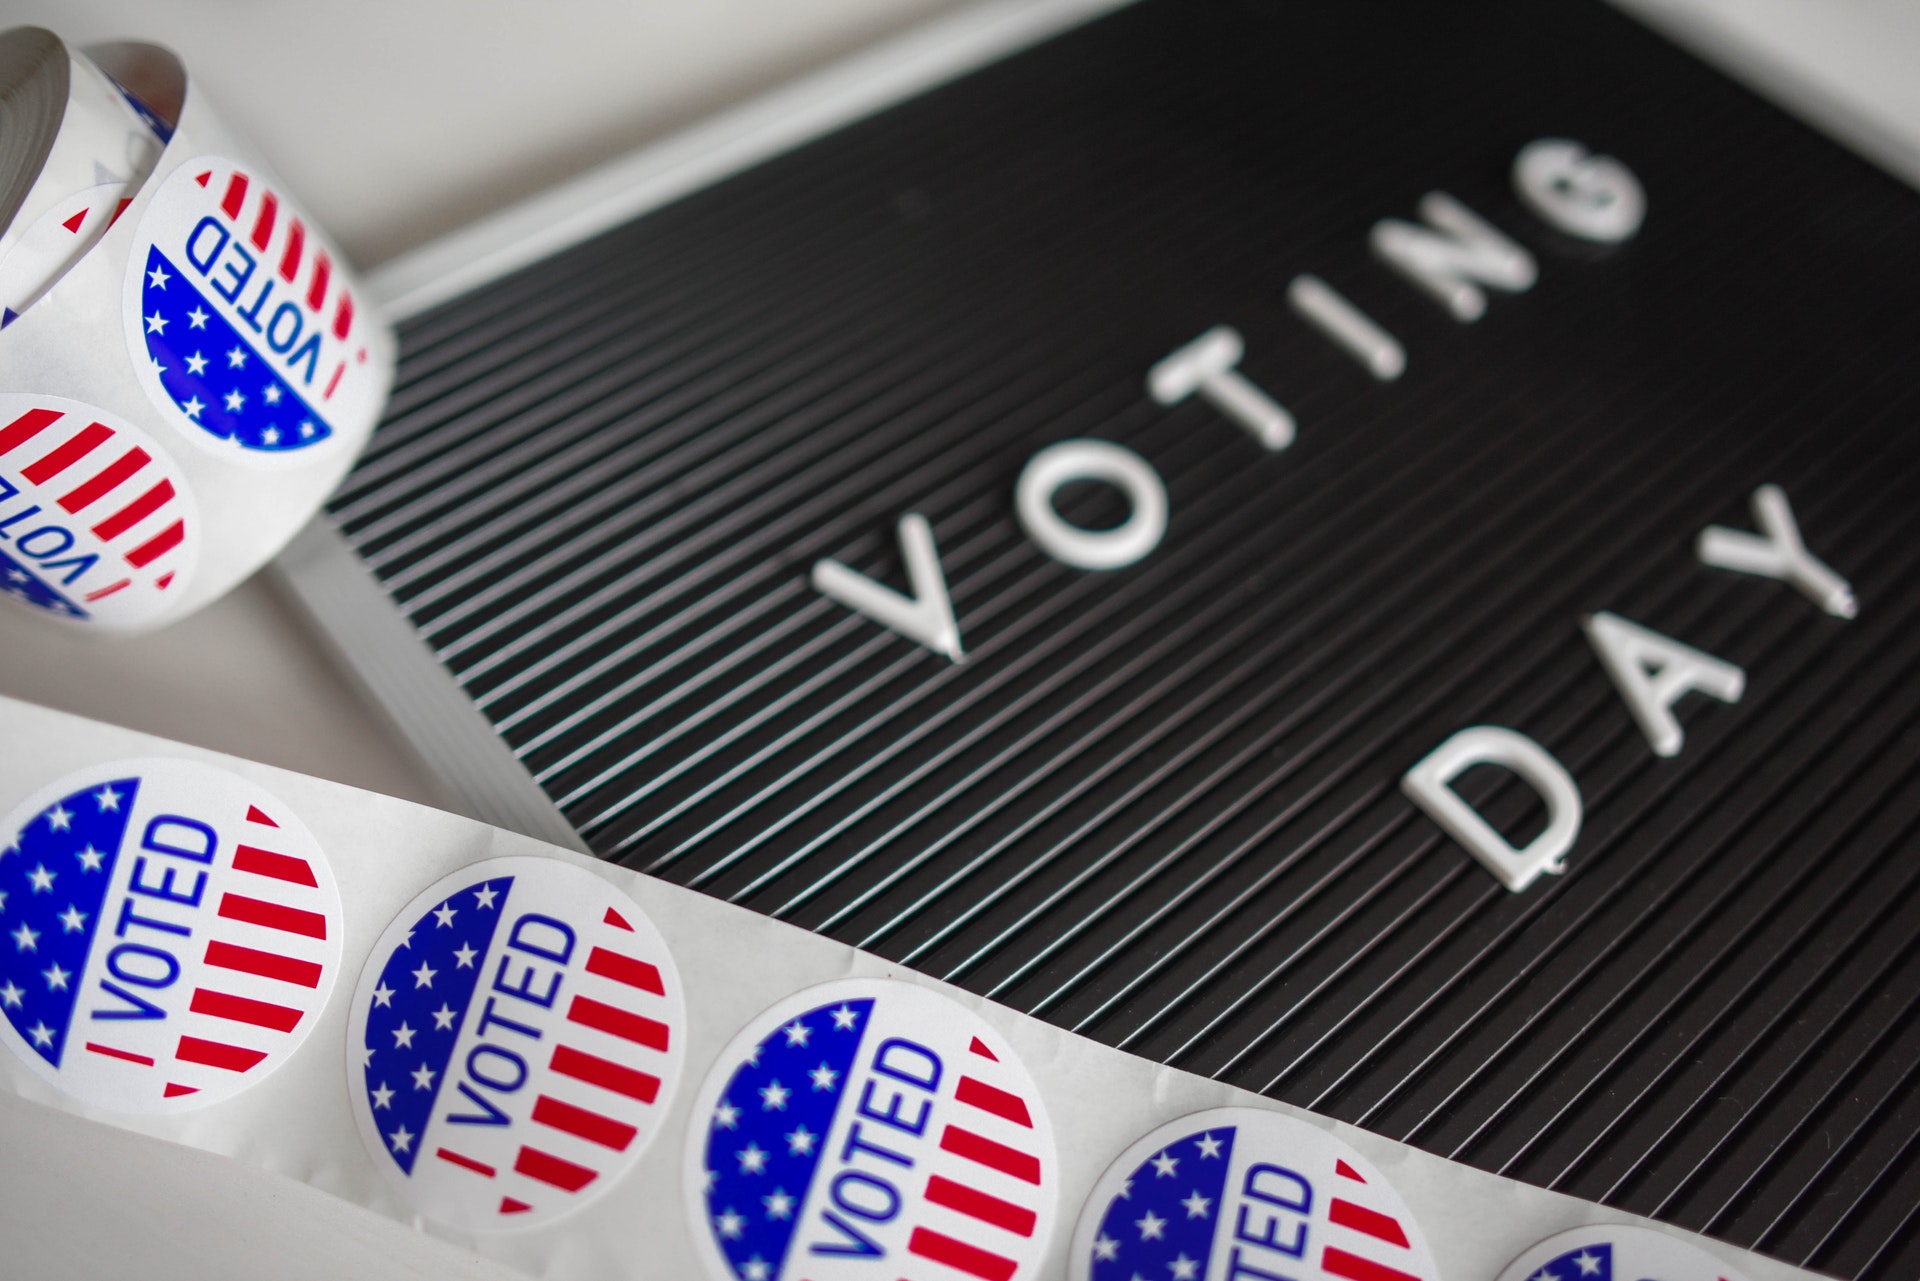 It’s Voting Time – Check Your ID!